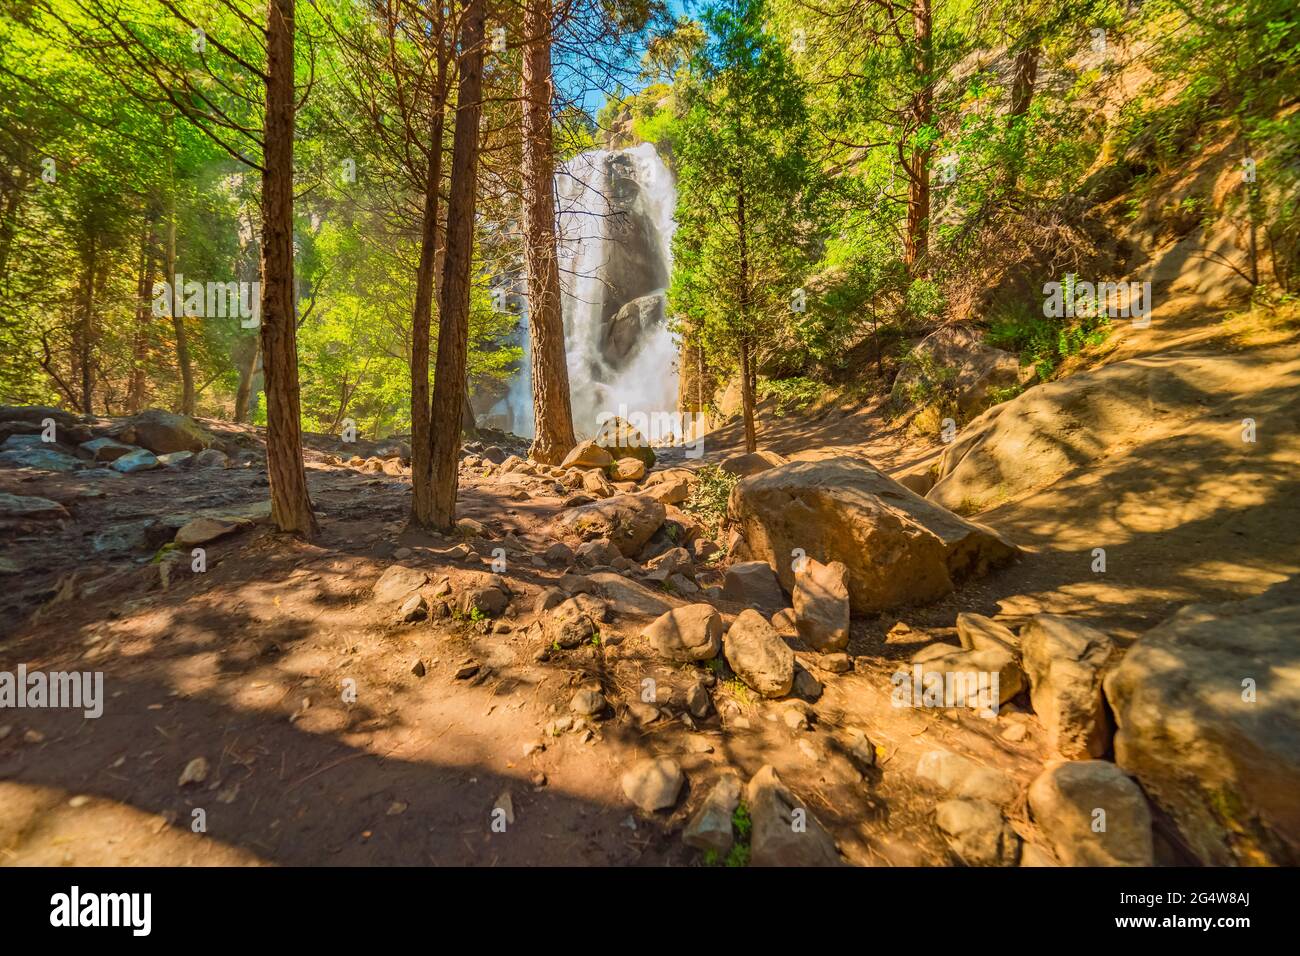 Grizzly Falls water falls down the hillside into the pine forest below in King's Canyon National Park in Central California Stock Photo